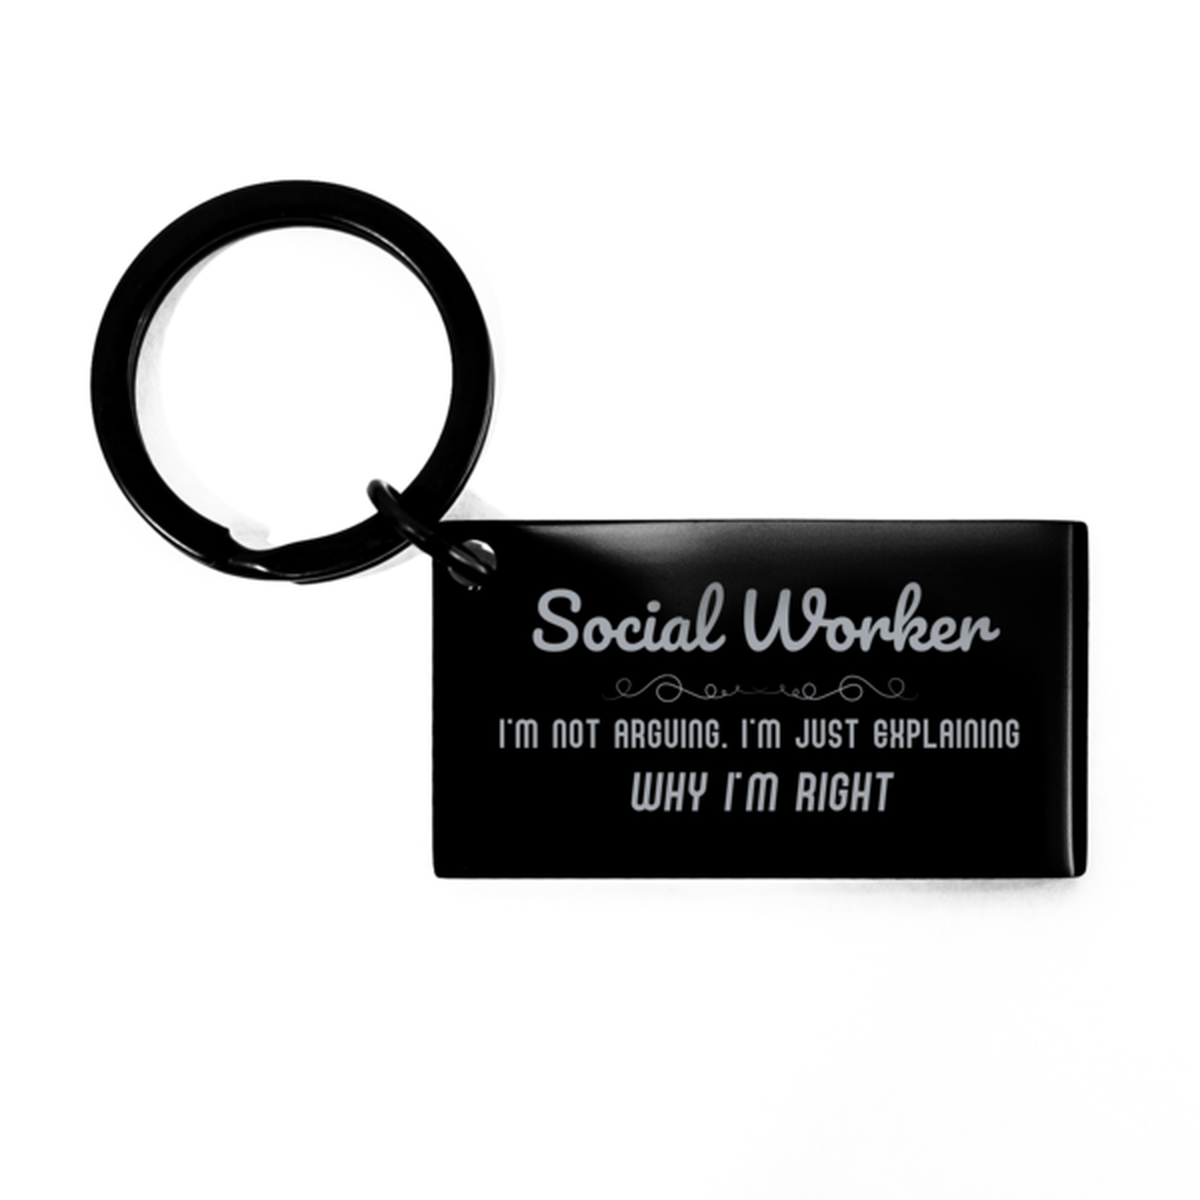 Social Worker I'm not Arguing. I'm Just Explaining Why I'm RIGHT Keychain, Funny Saying Quote Social Worker Gifts For Social Worker Graduation Birthday Christmas Gifts for Men Women Coworker